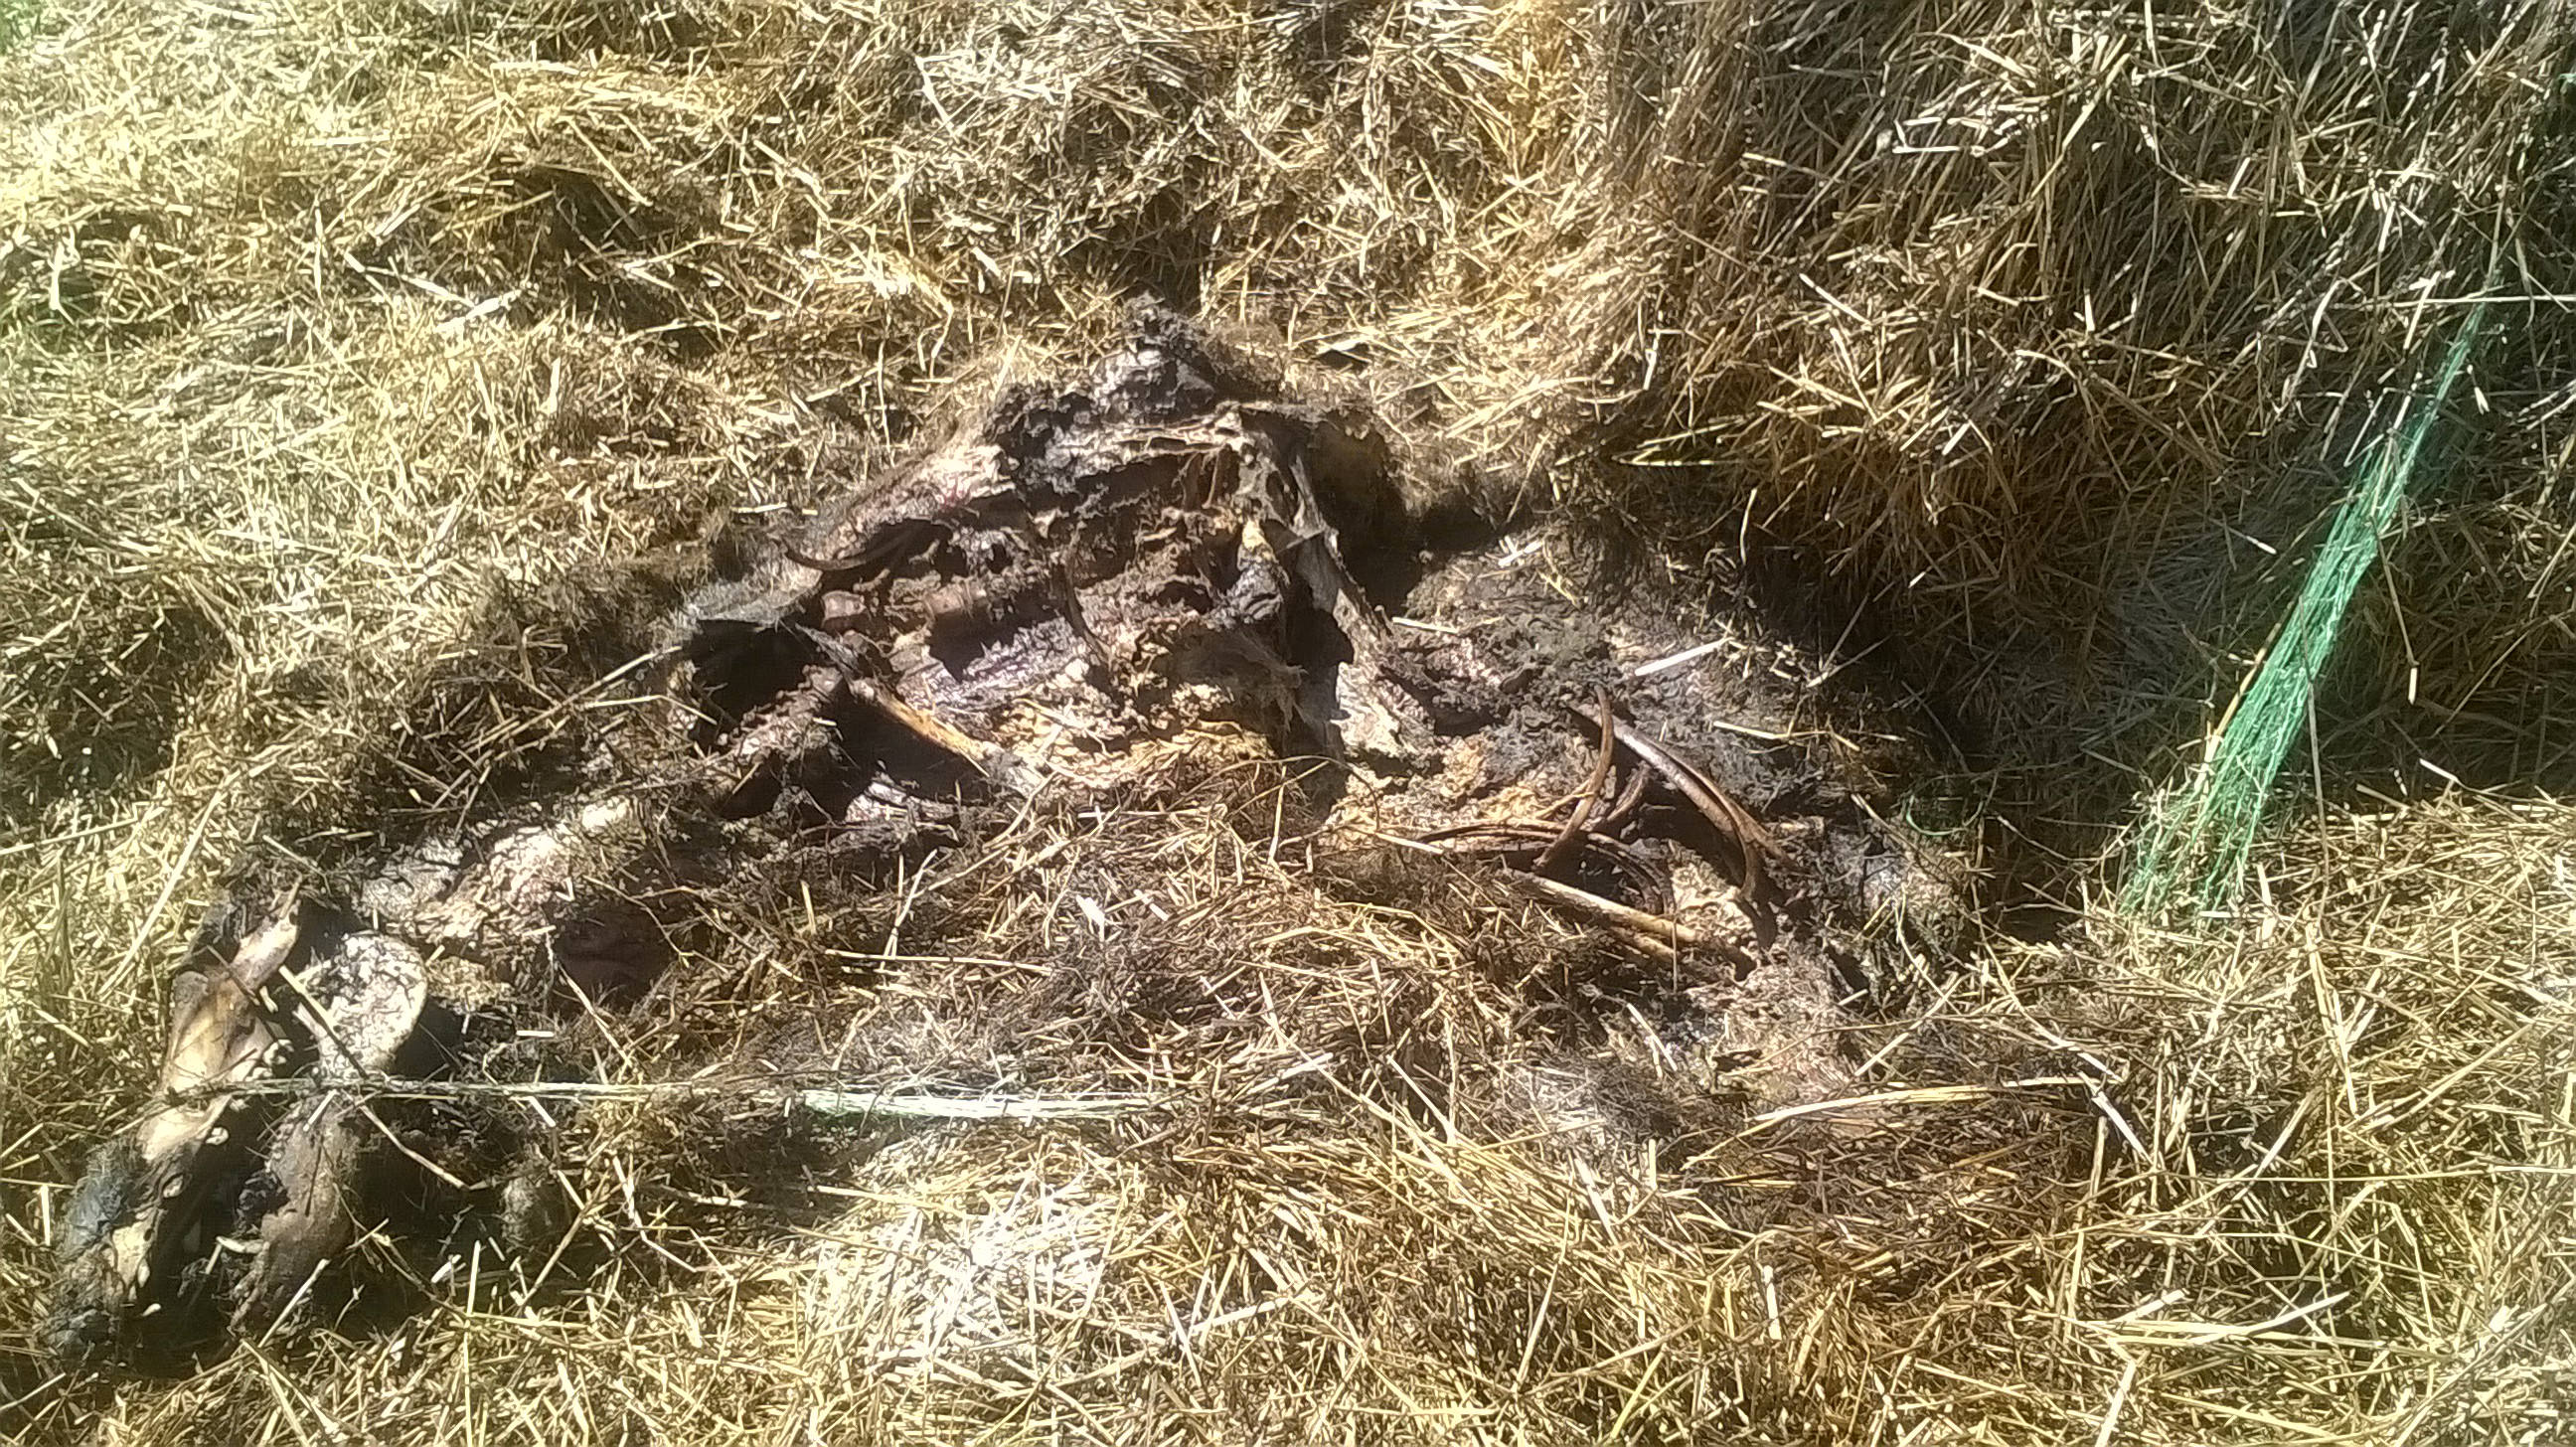 Fig. 2. Carcass in straw